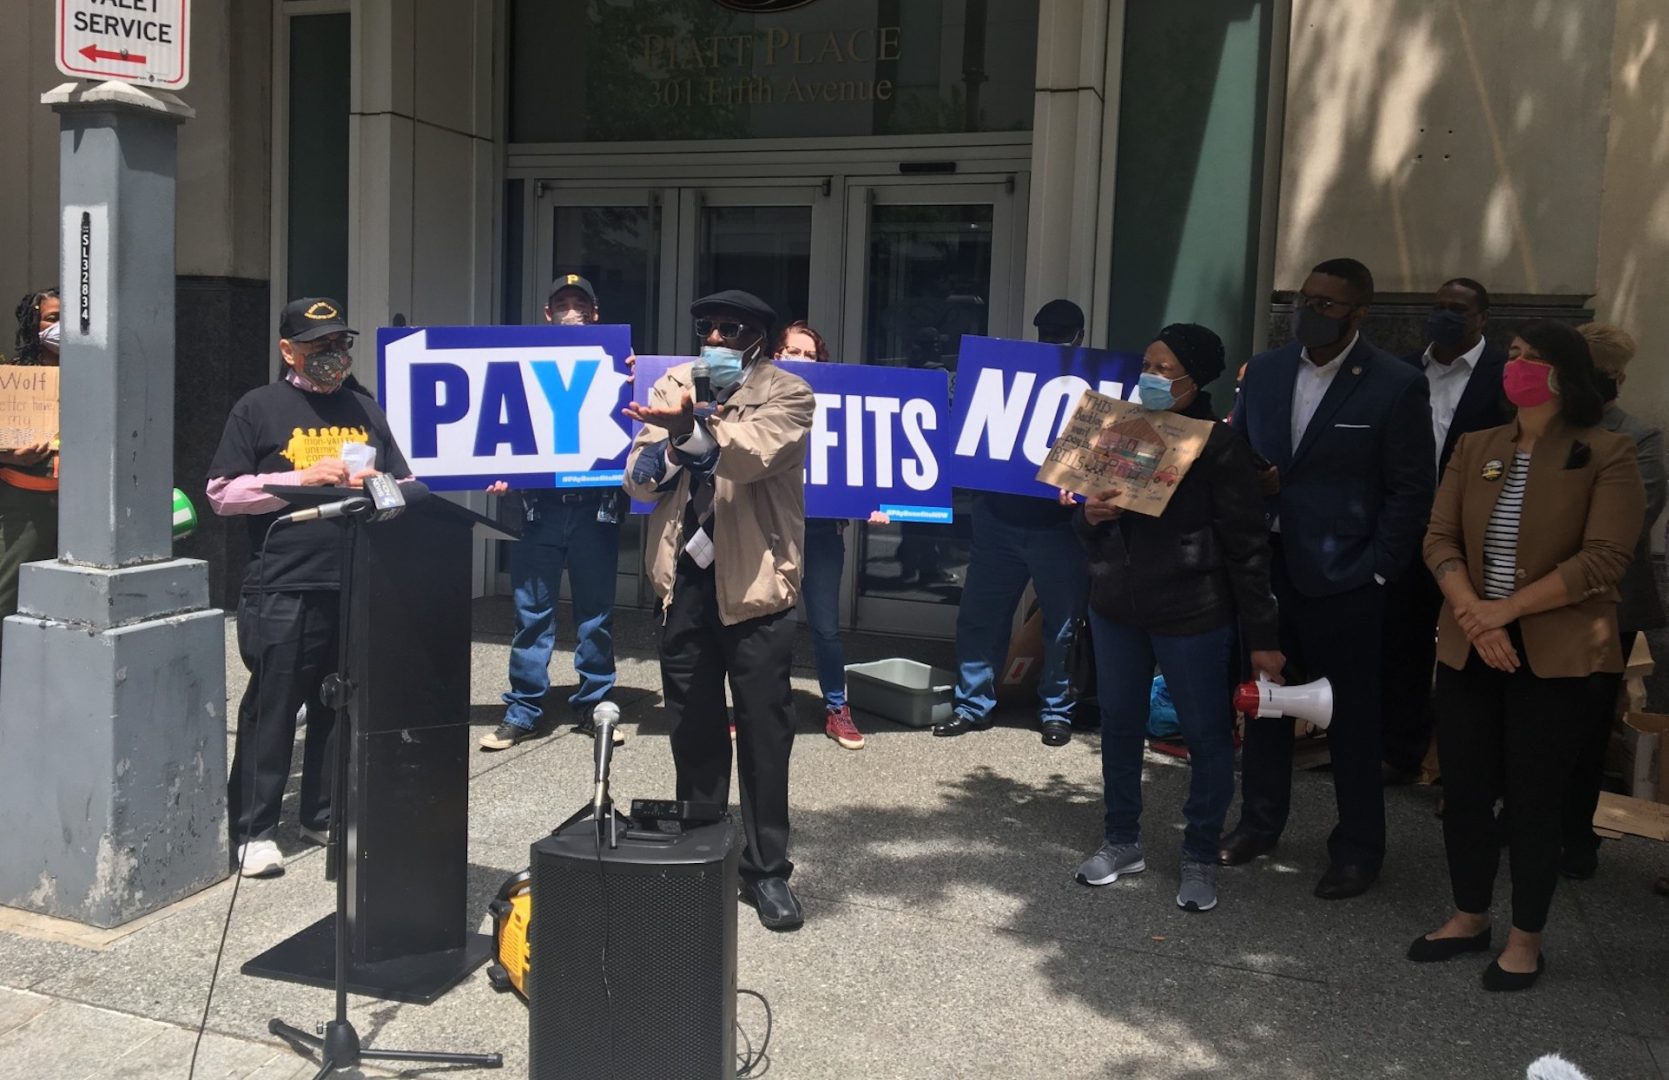 Cornell Brunson describes the difficulties he had trying to collect Unemployment Compensation benefits. He was speaking May 6, 2021 at a rally outside of Gov. Tom Wolf's regional office in Pittsburgh.